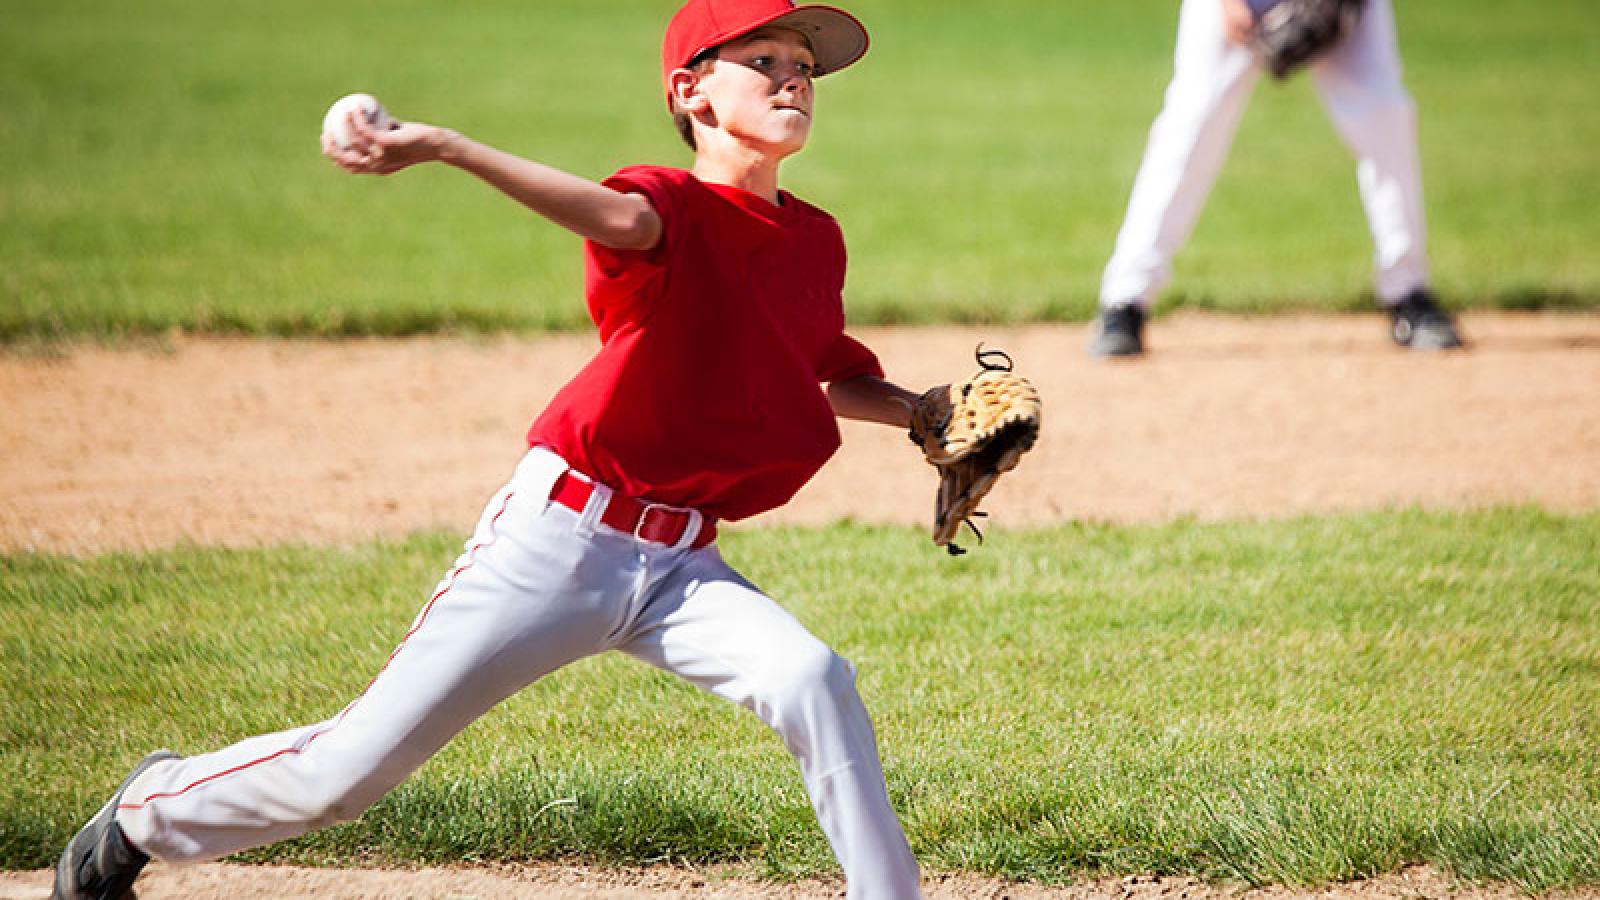 The Youth and Adolescent Thrower: Tips to Avoid Elbow Pain